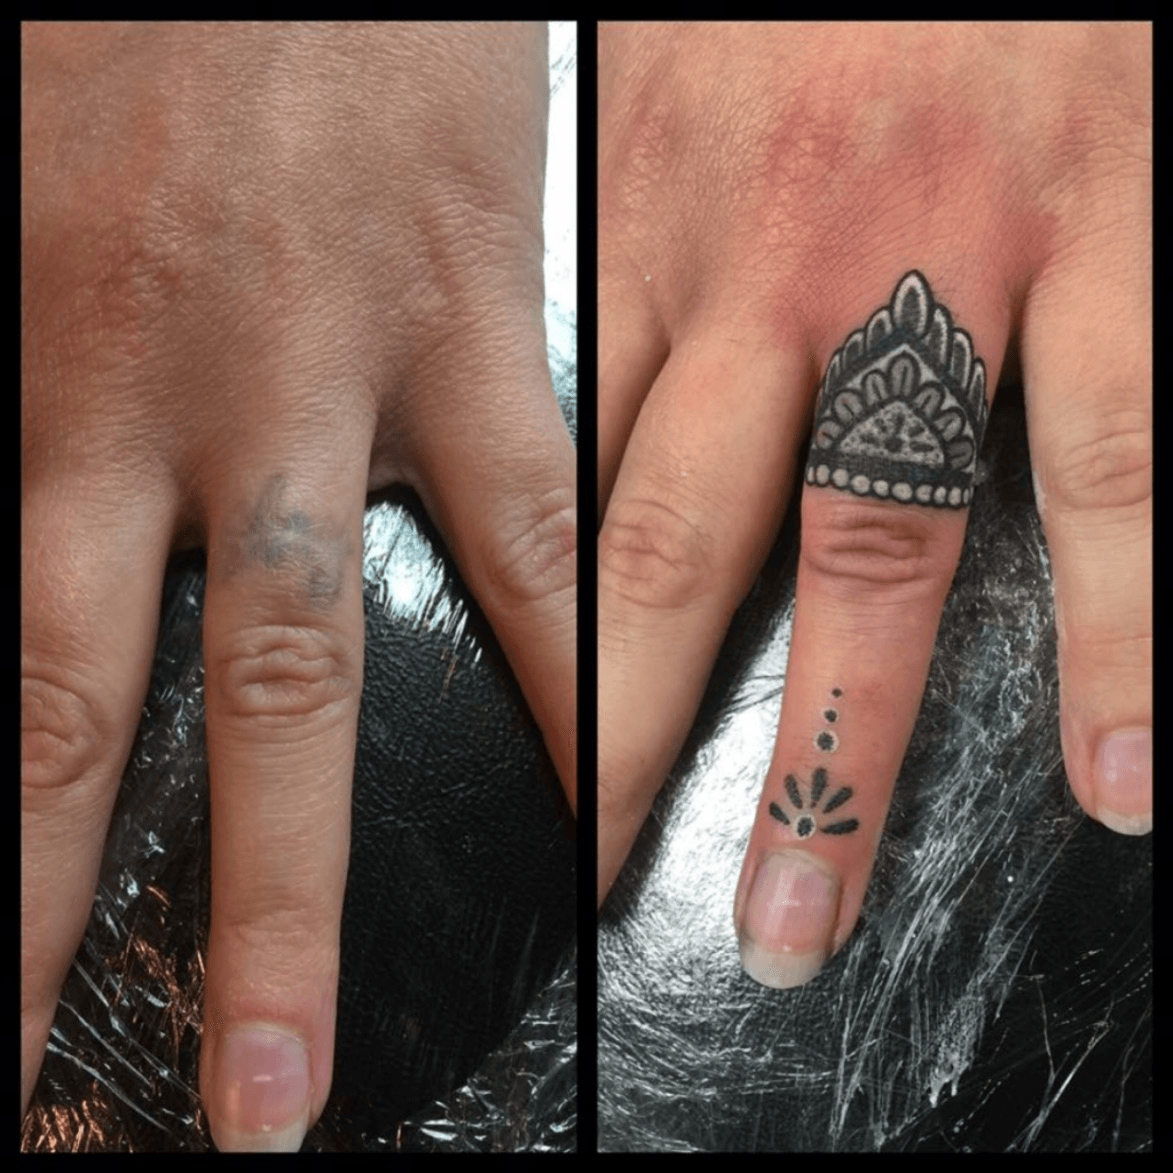 Aggregate 76 ring tattoo cover up latest  thtantai2